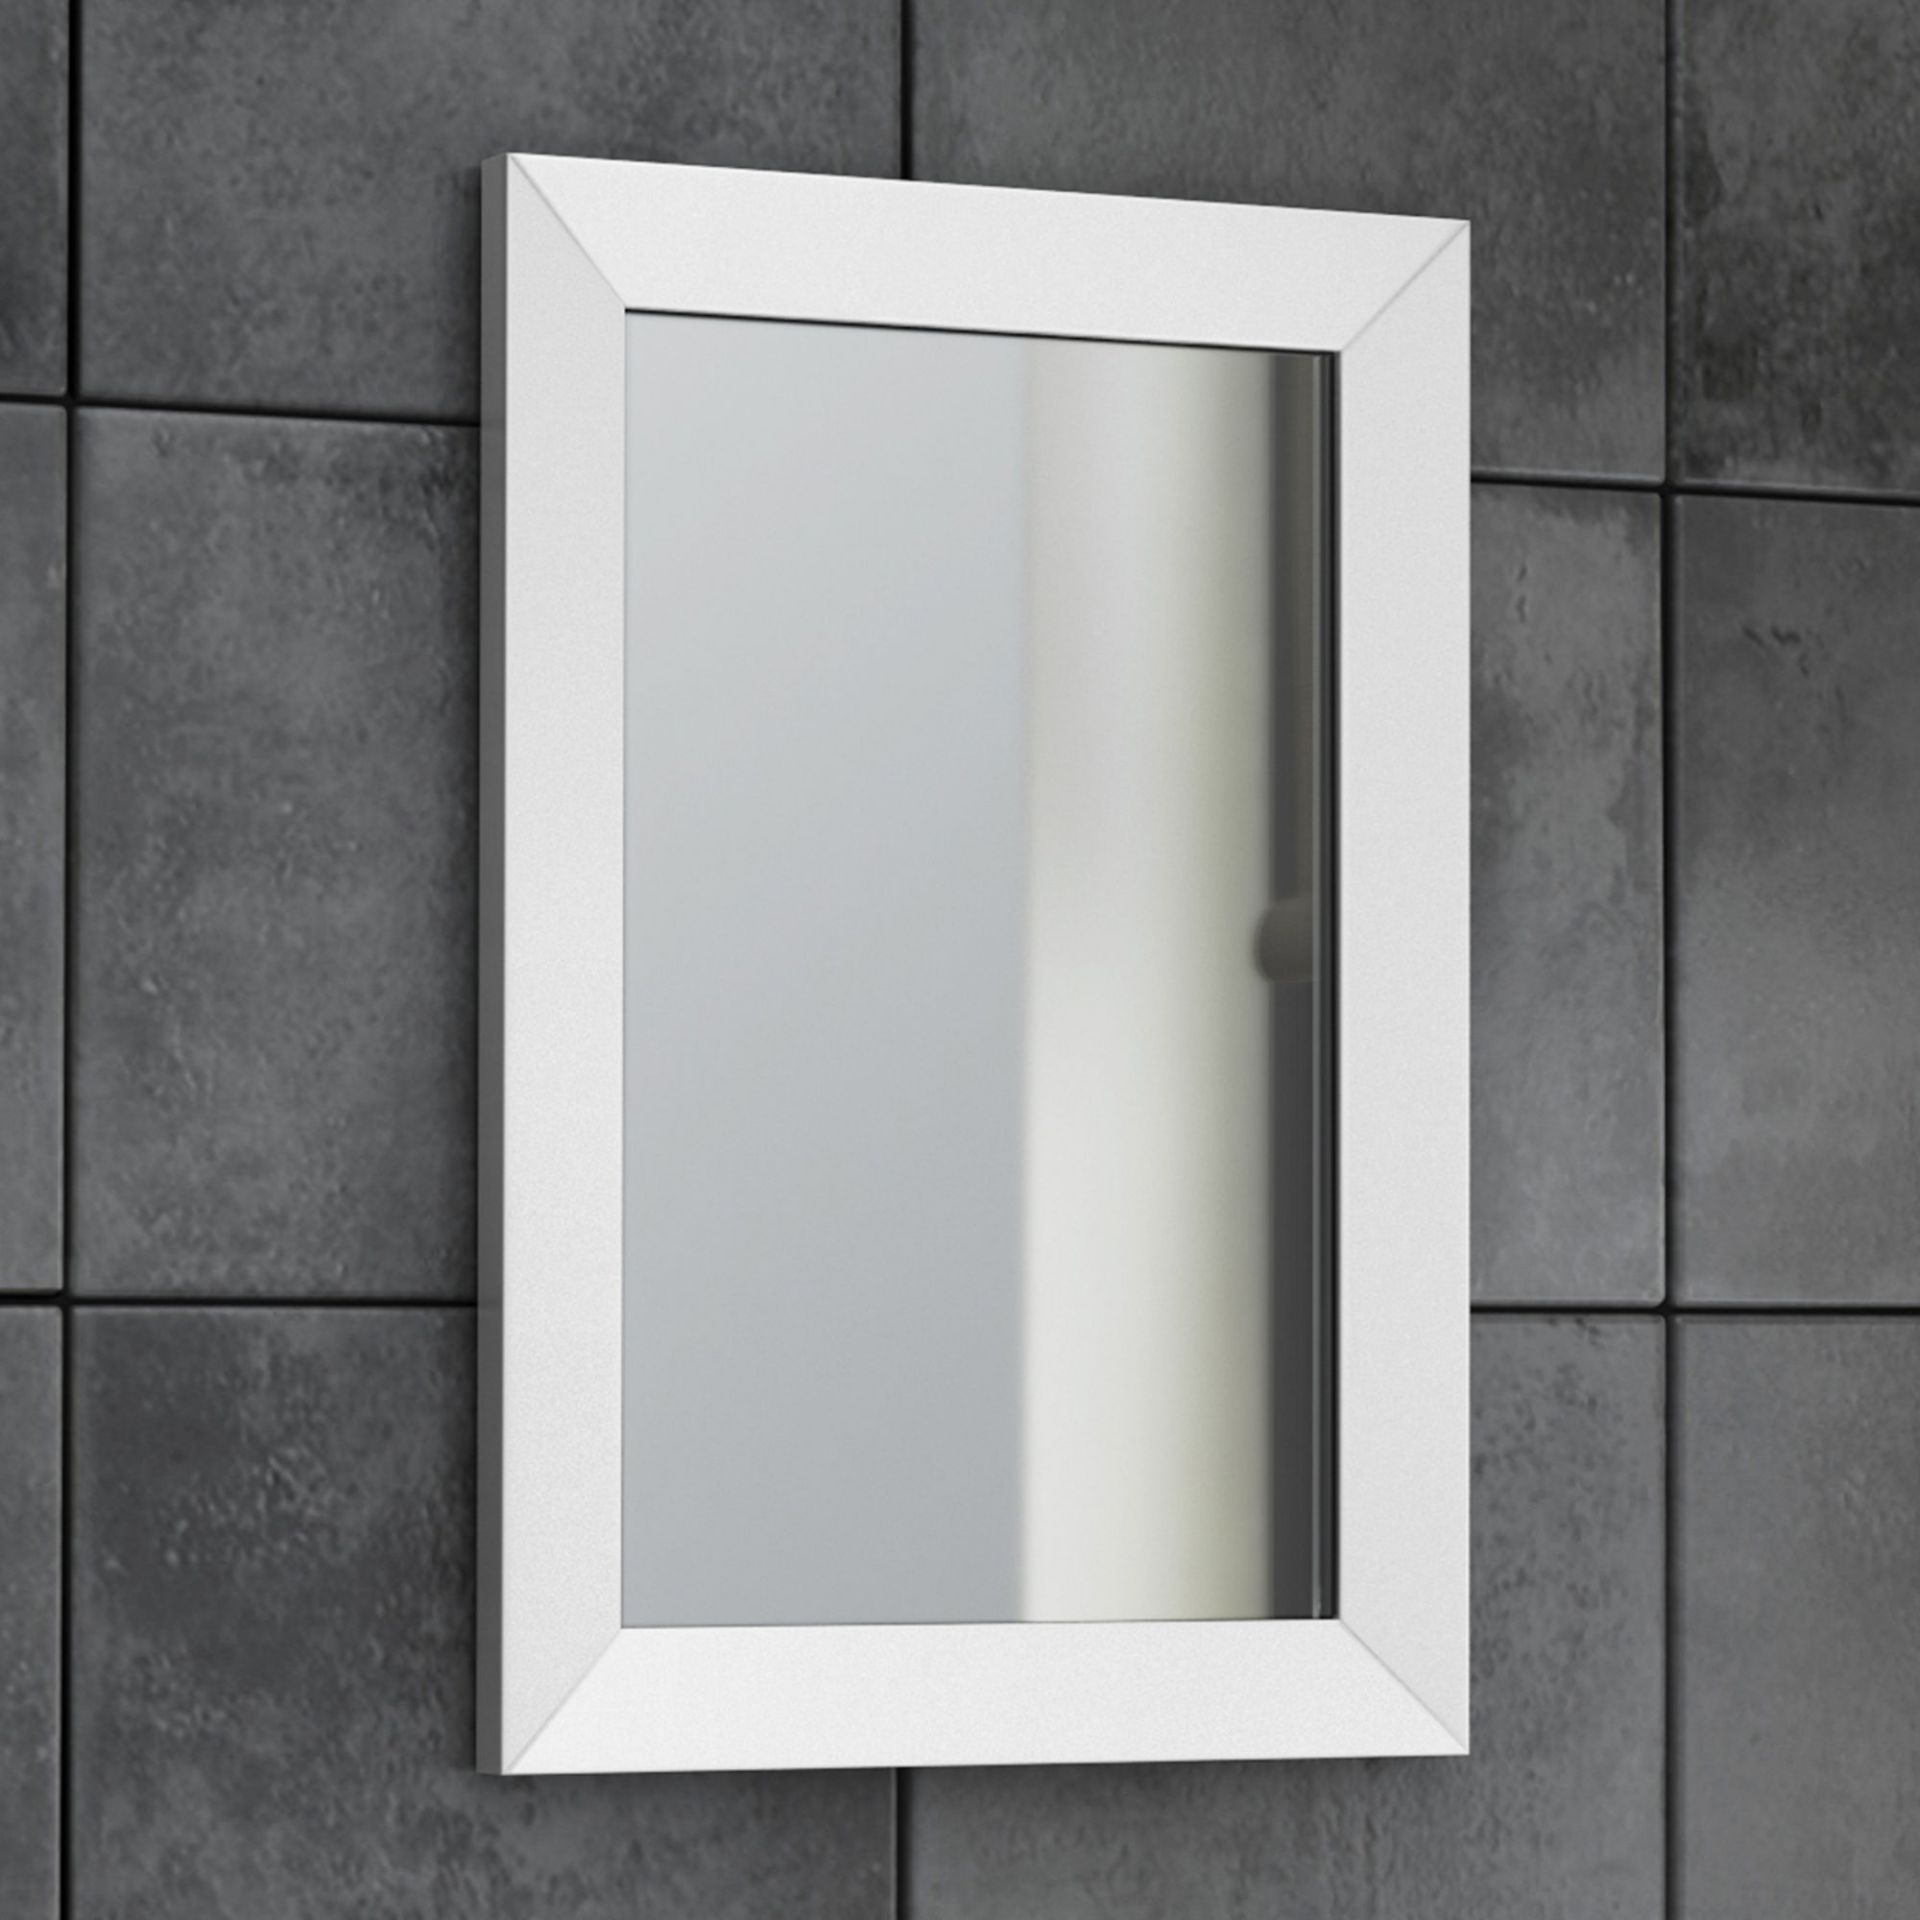 (DW48) 300x450mm Clover Gloss White Framed Mirror Made from eco friendly recycled plastics Wa...